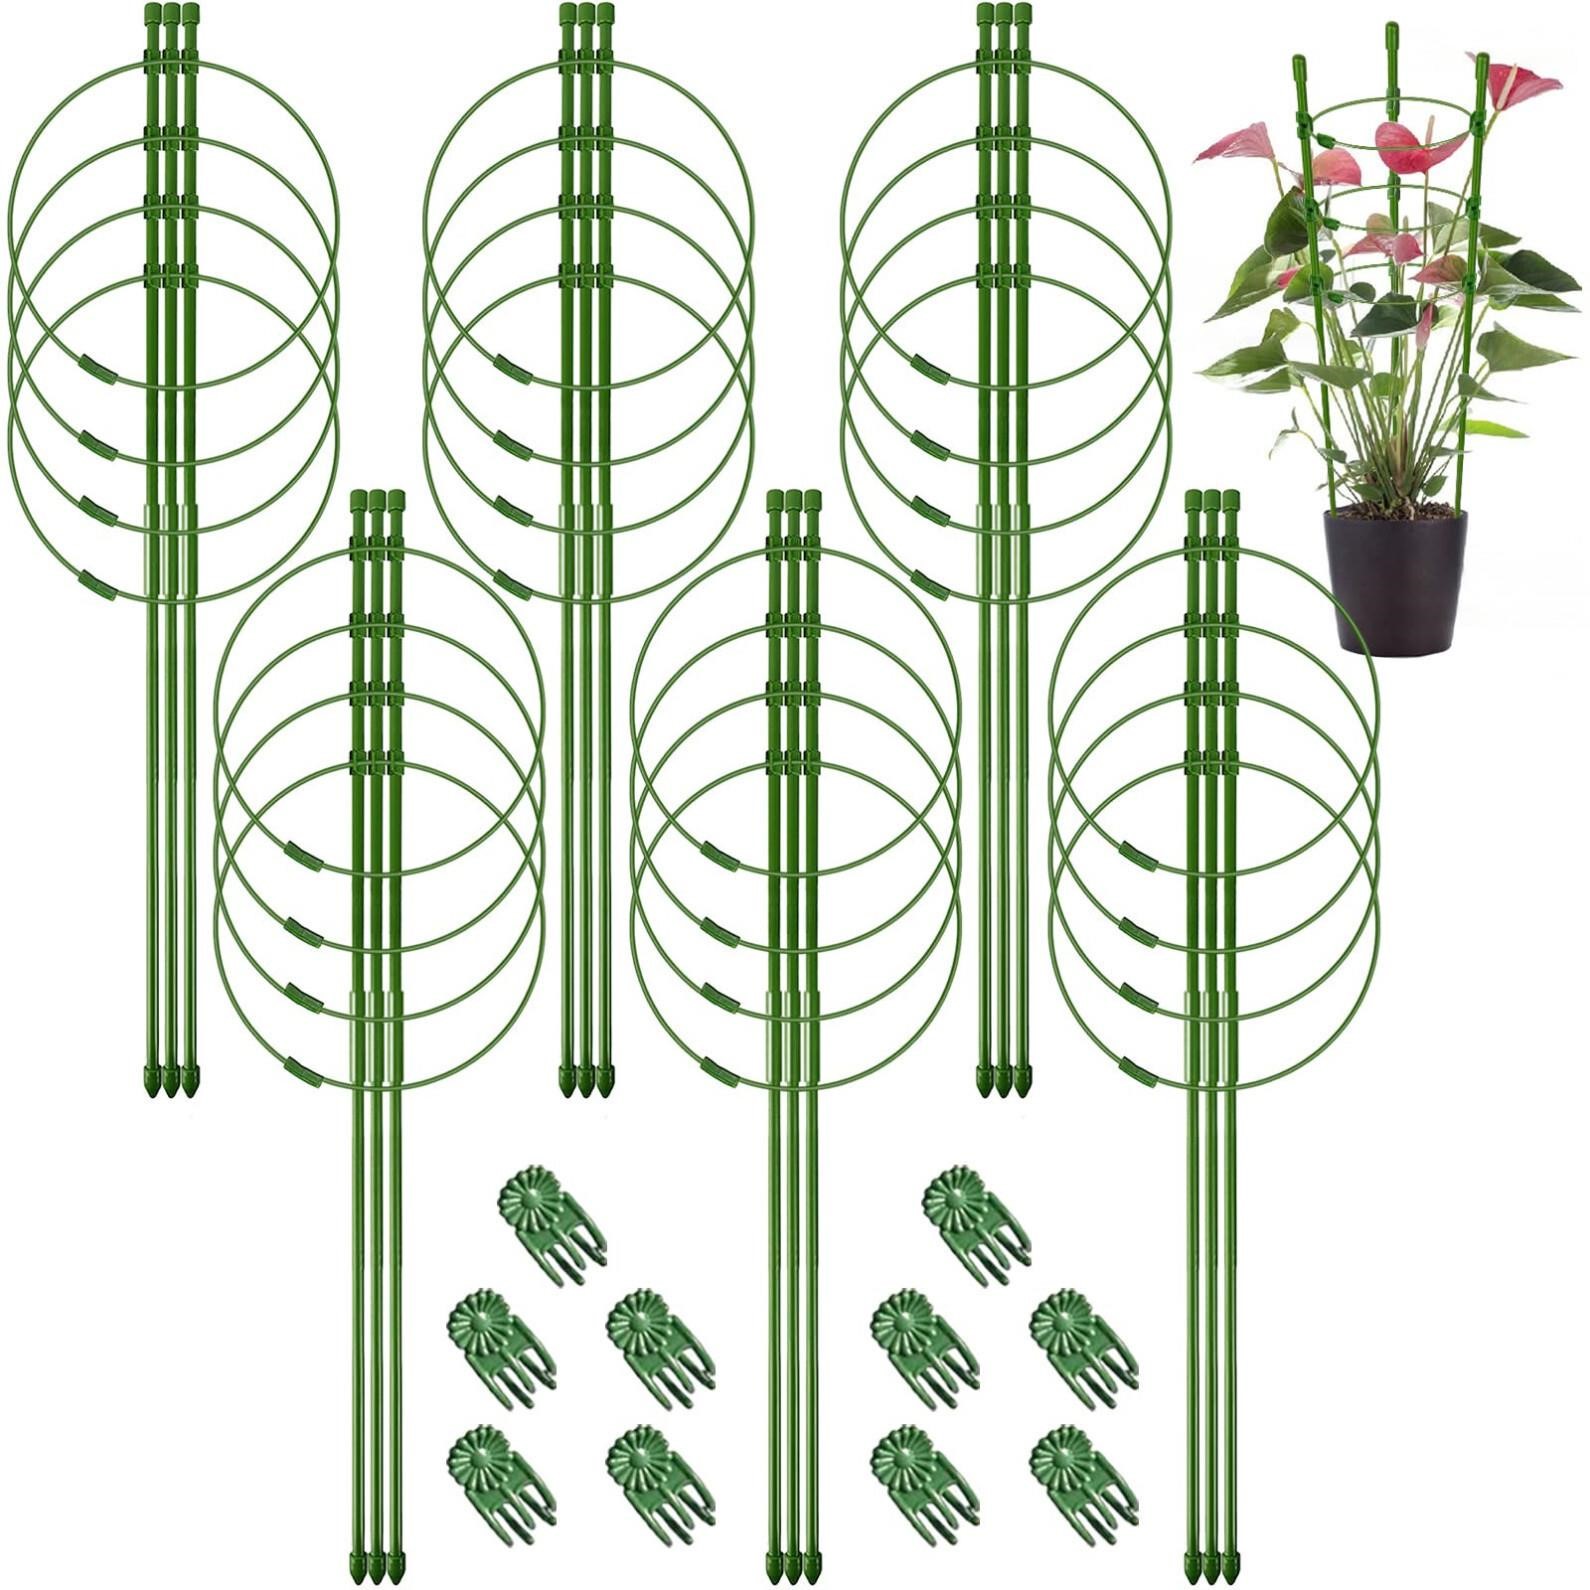 Legigo 6 Packs 46inch Plant Support Cages with 3 A